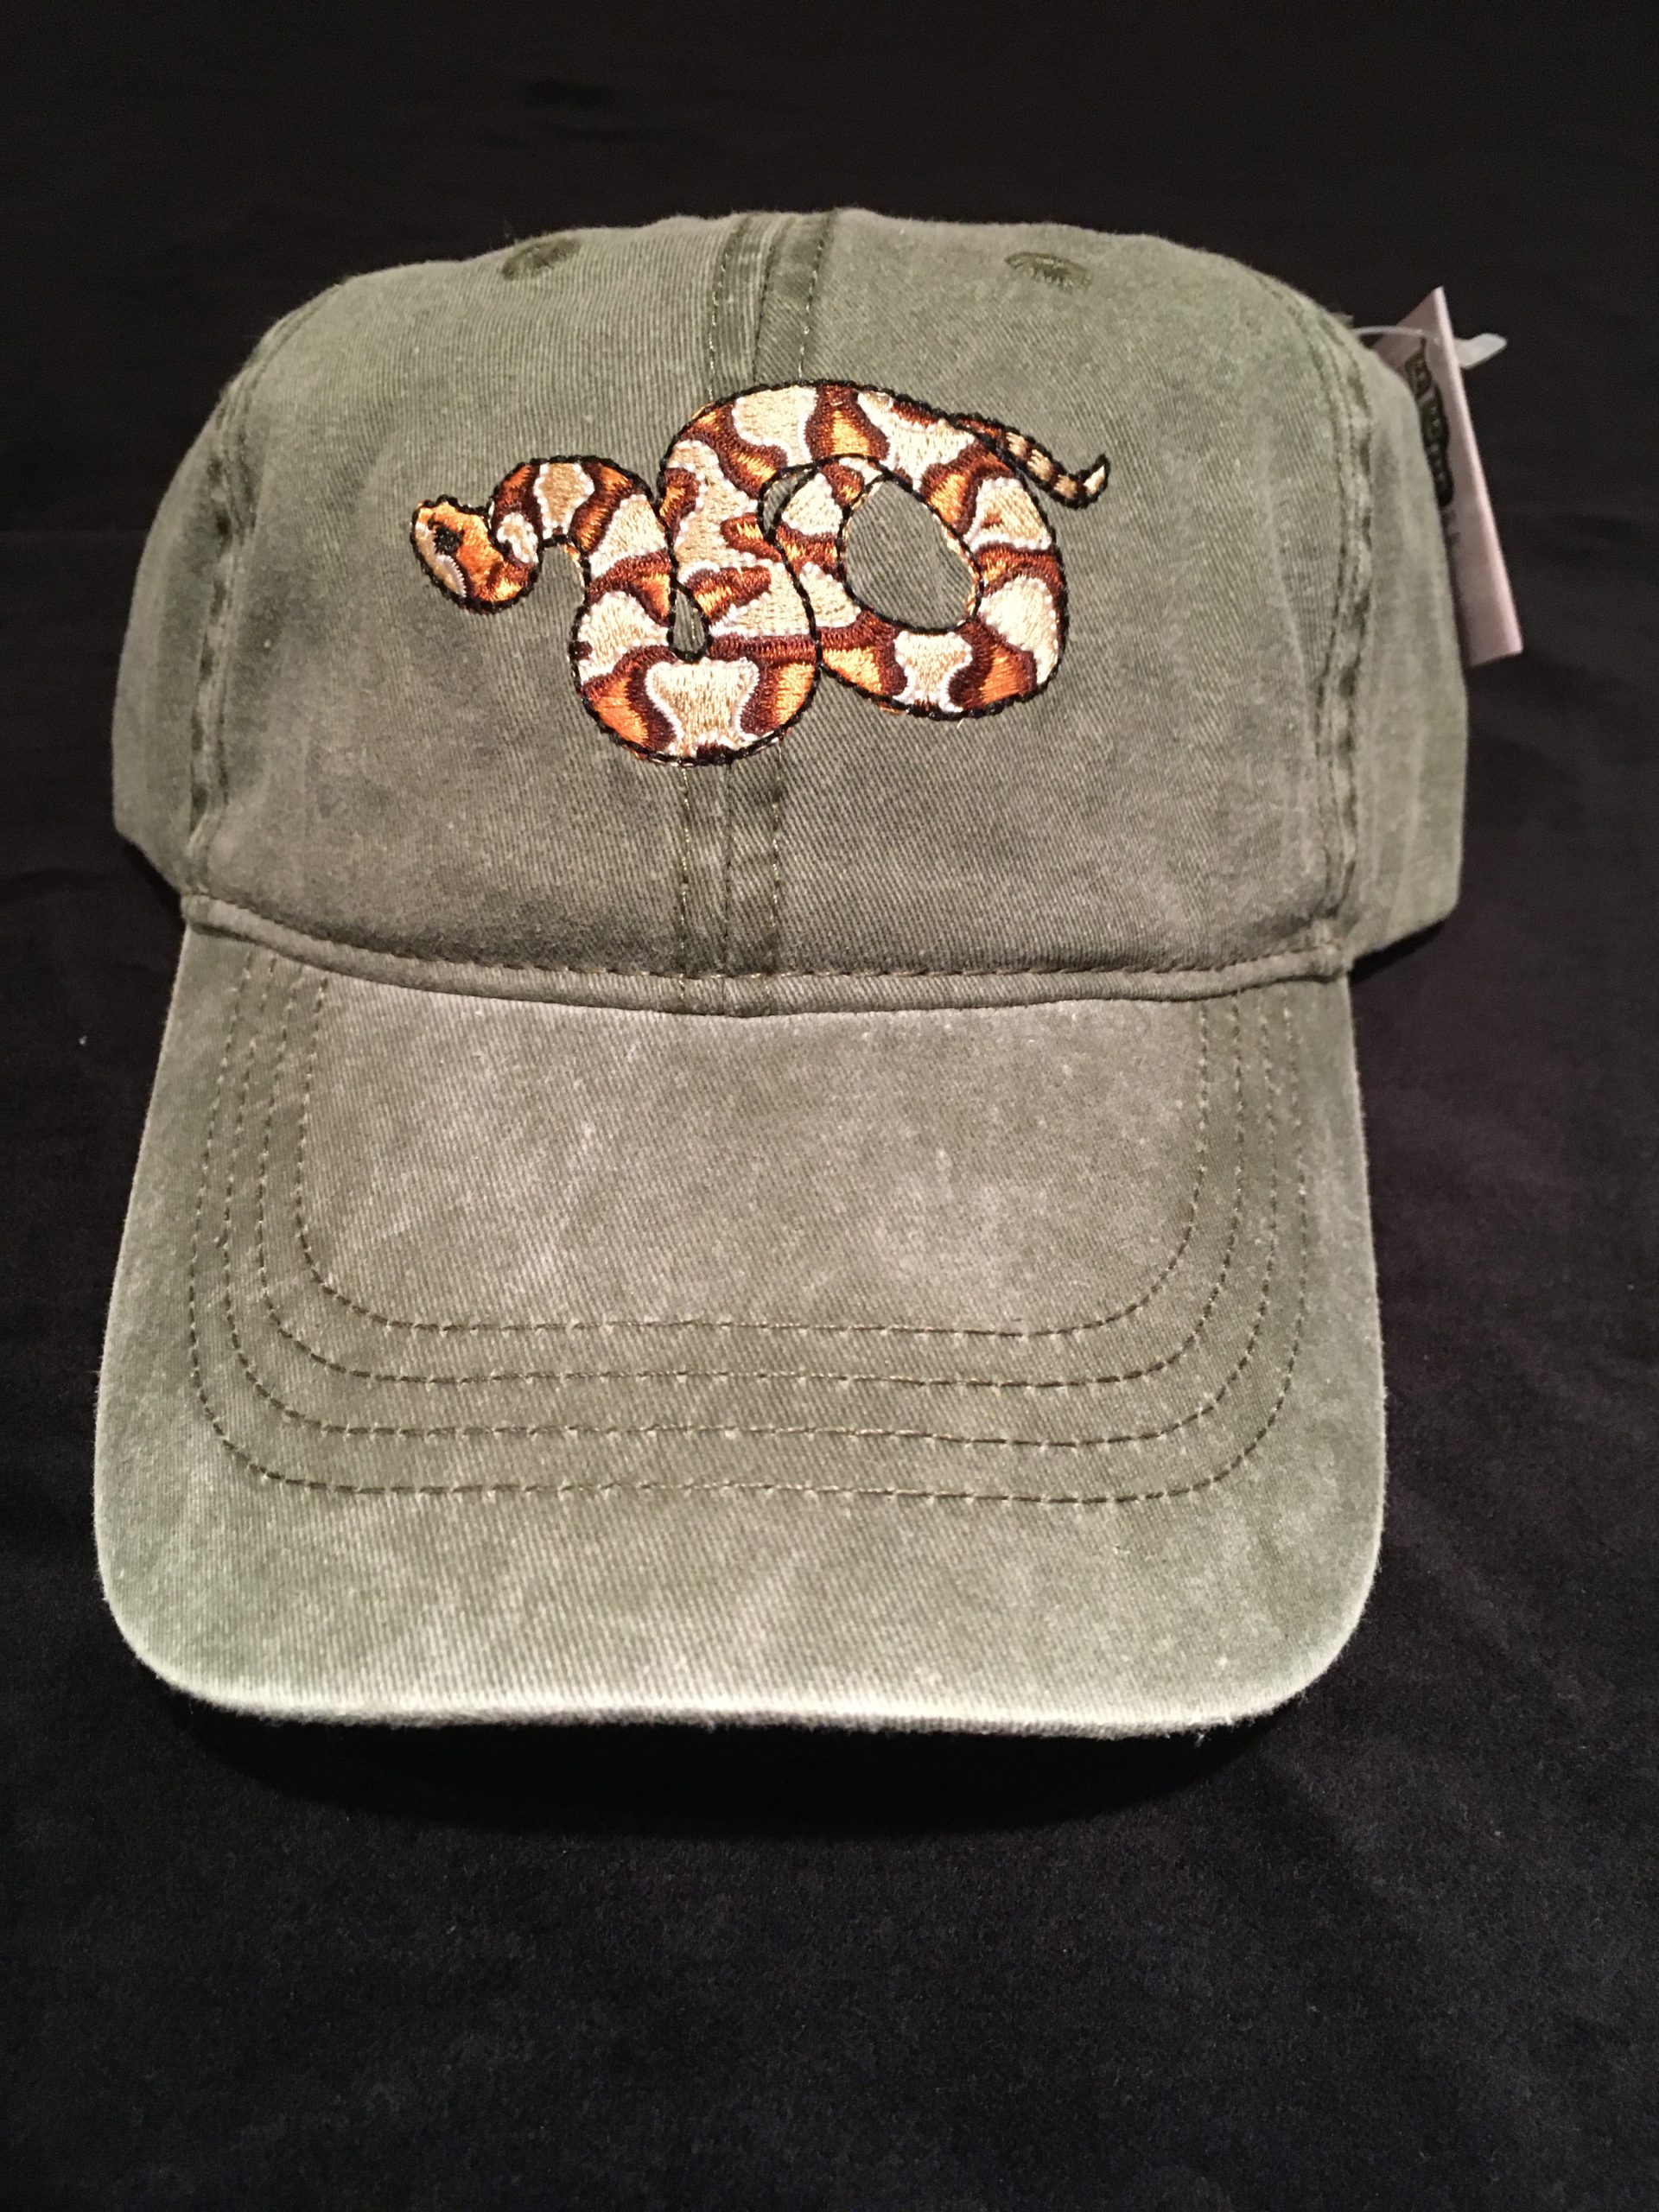 Copperhead Snake Embroidered Cotton Cap NEW Reptile 